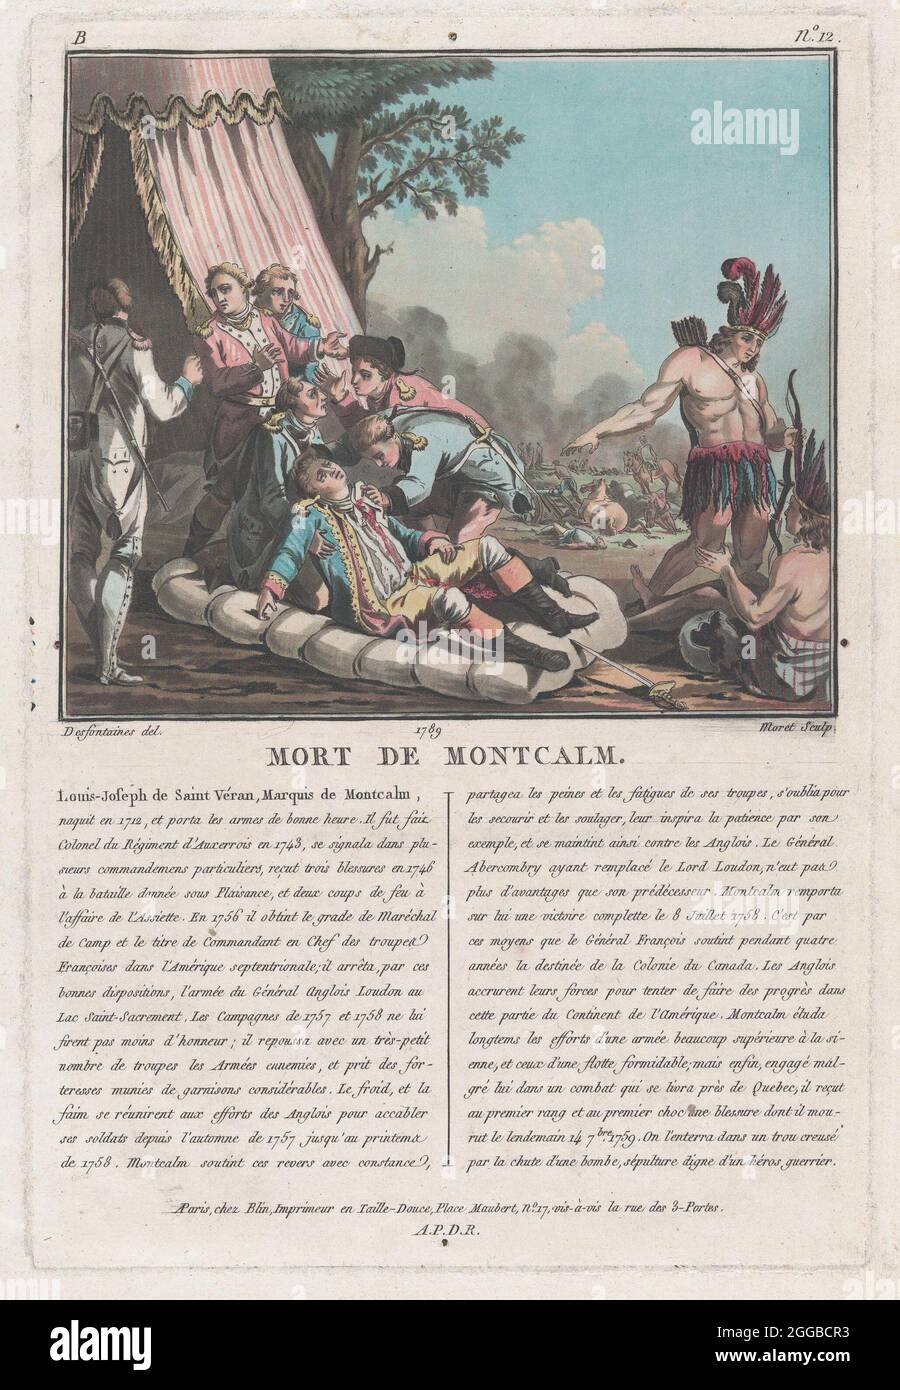 Mort de Montcalm [The Death of Montcalm at Quebec, September 14, 1759], late 18th-early 19th century. Stock Photo